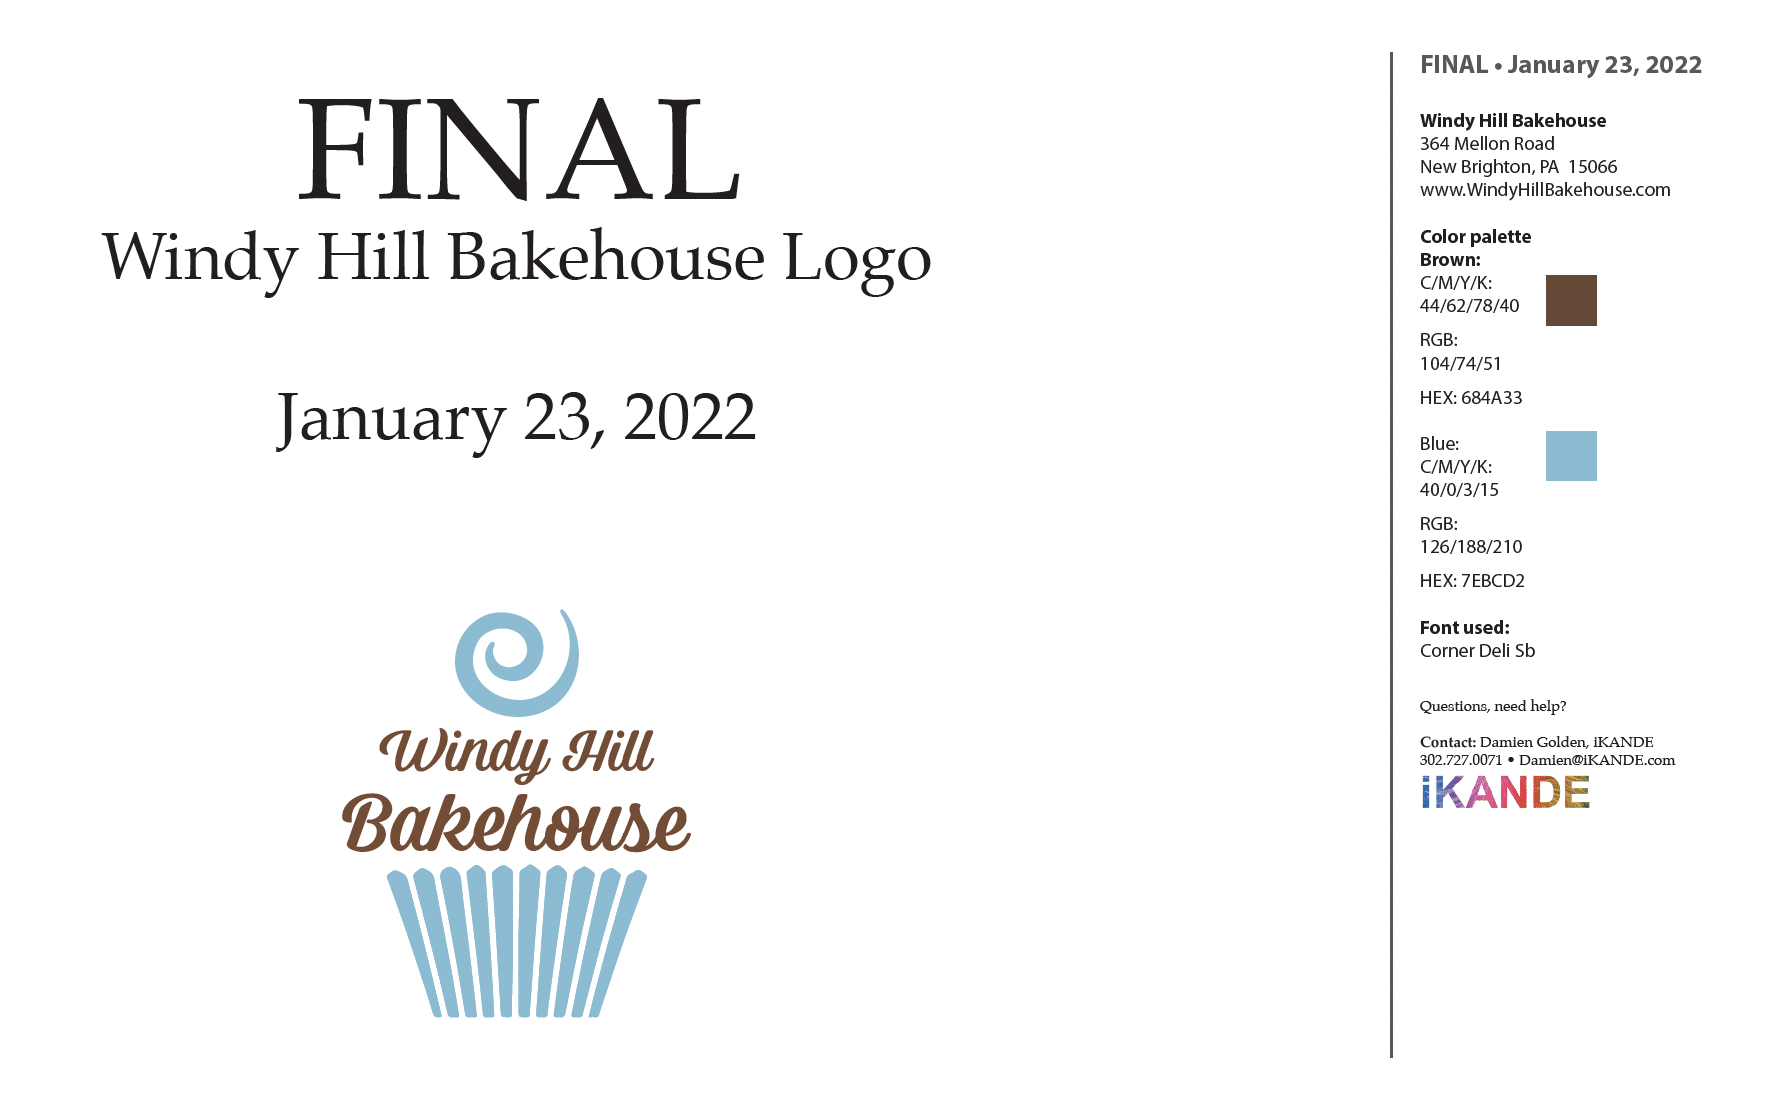 windy hill bakehouse logo brand guidelines by ikande